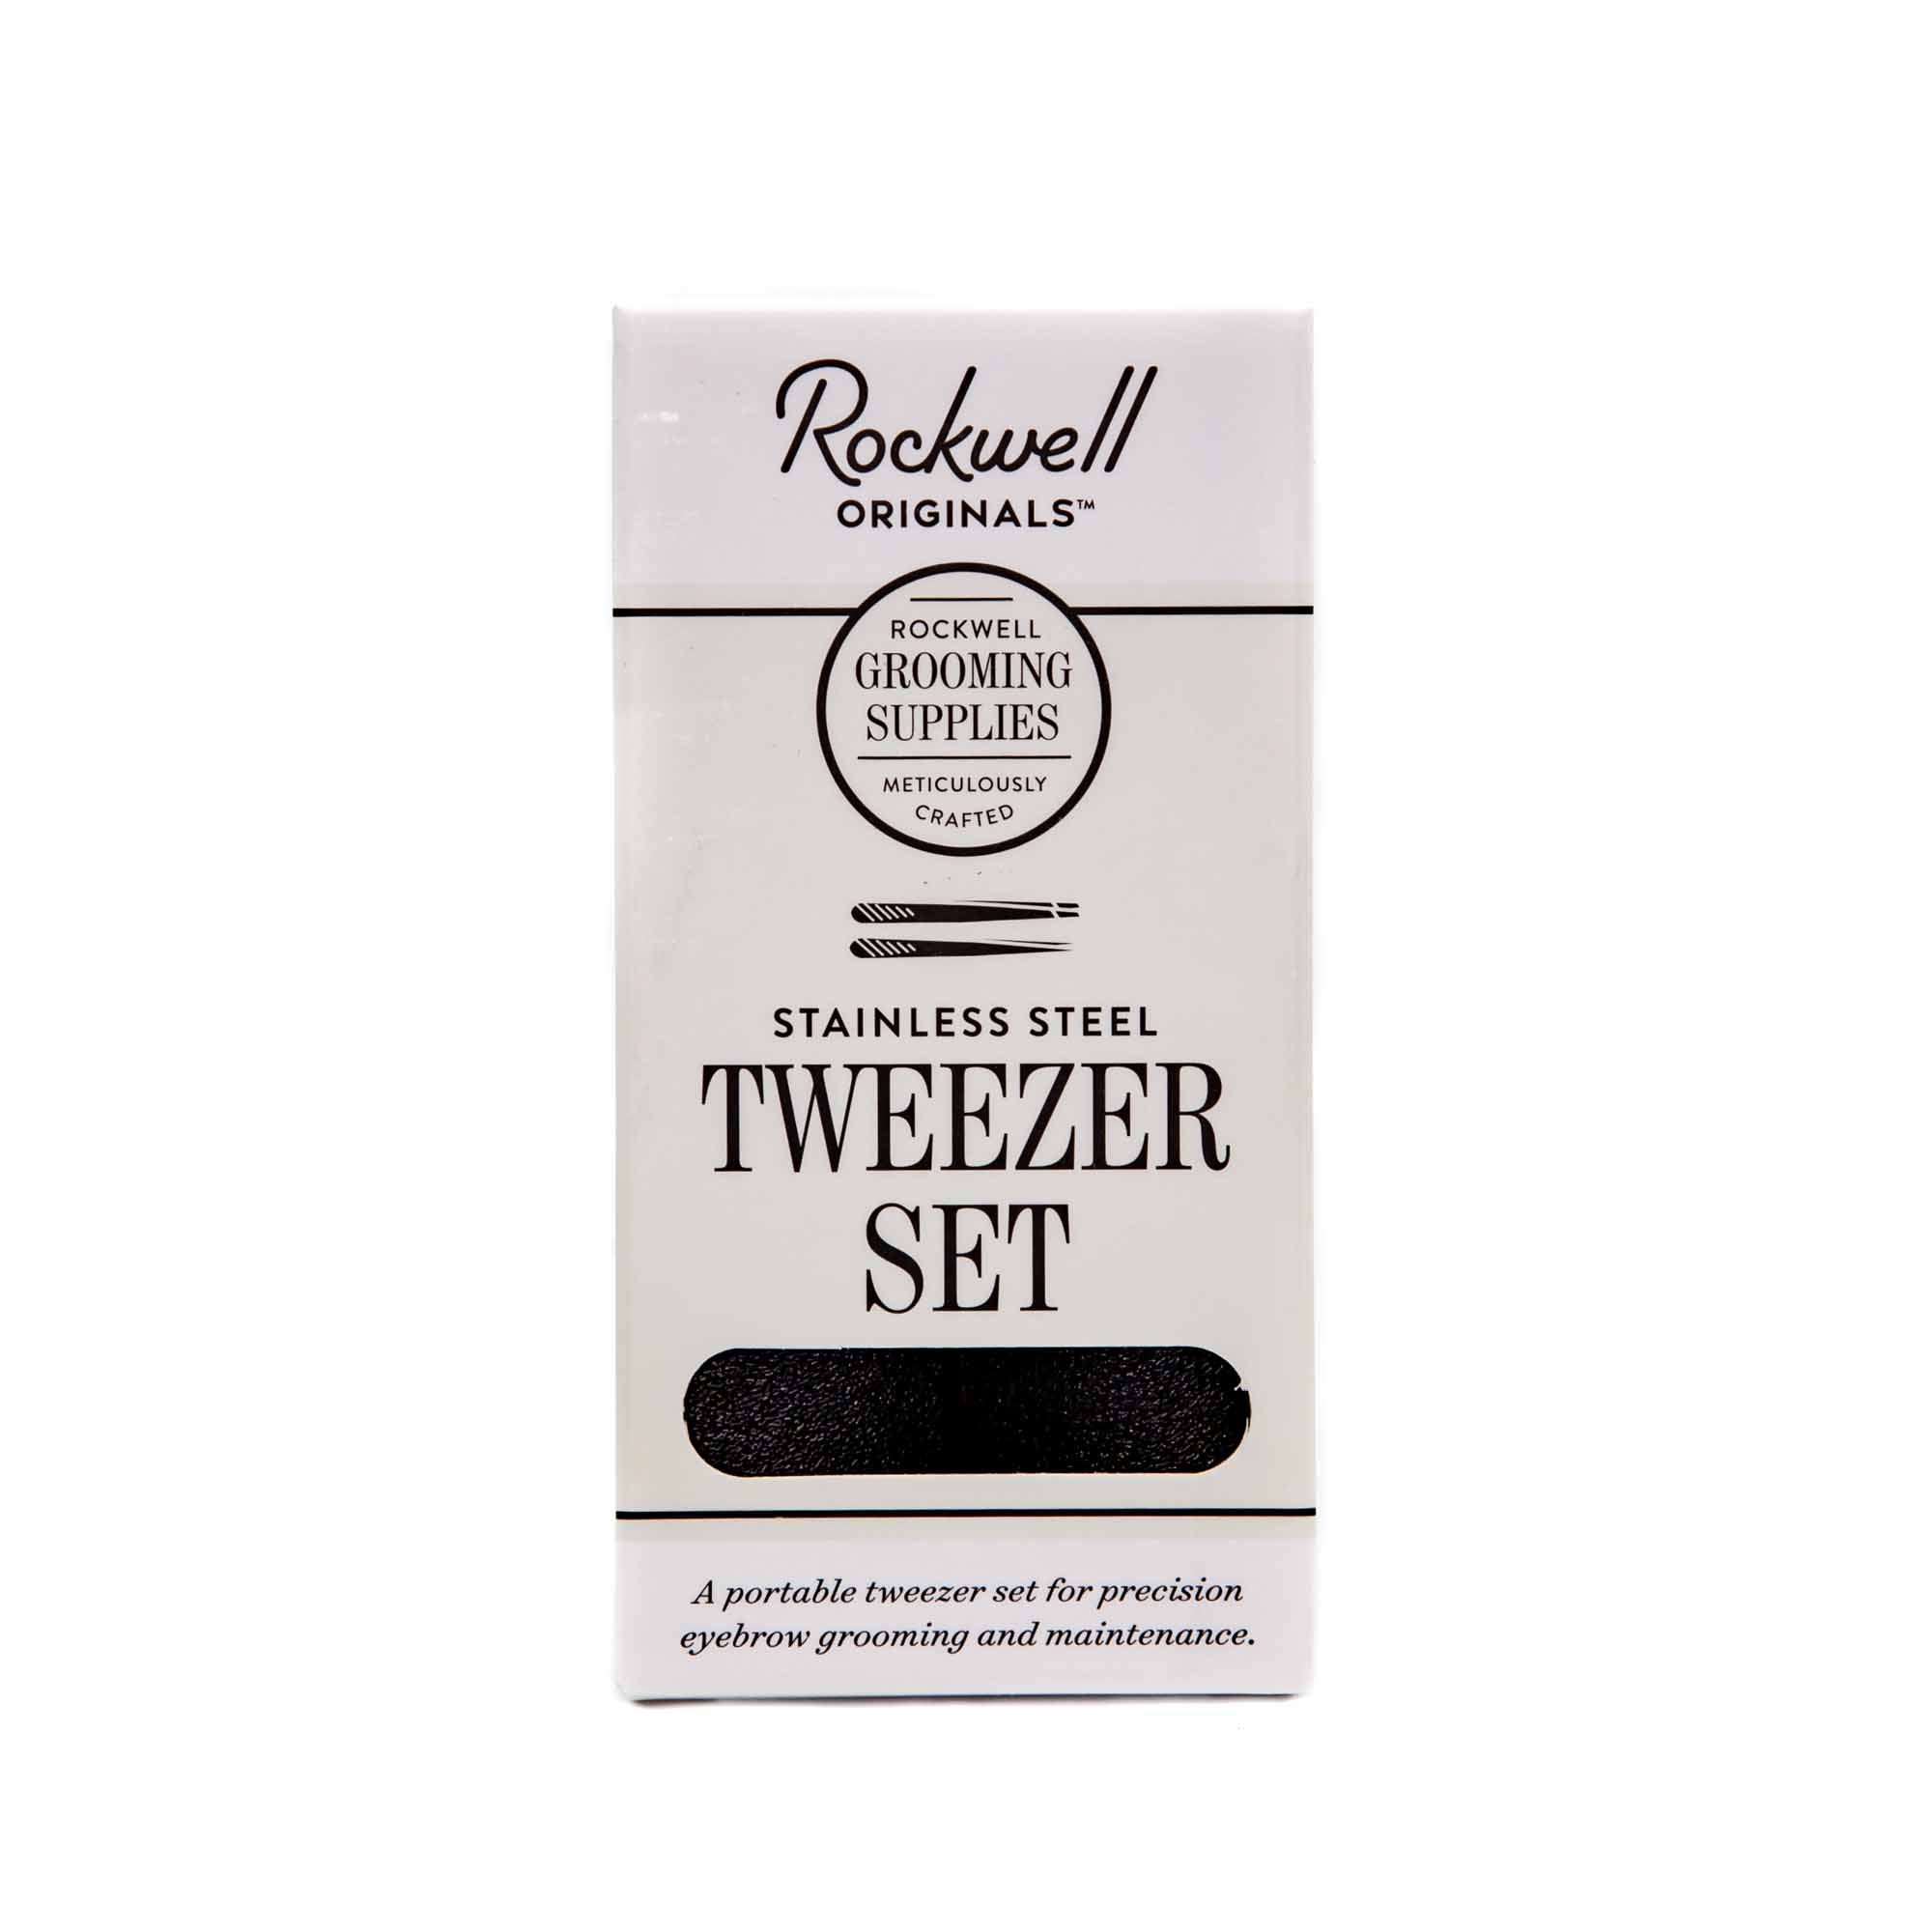 Rockwell Stainless Steel 2 Piece Tweezer Set - Mortise And Tenon